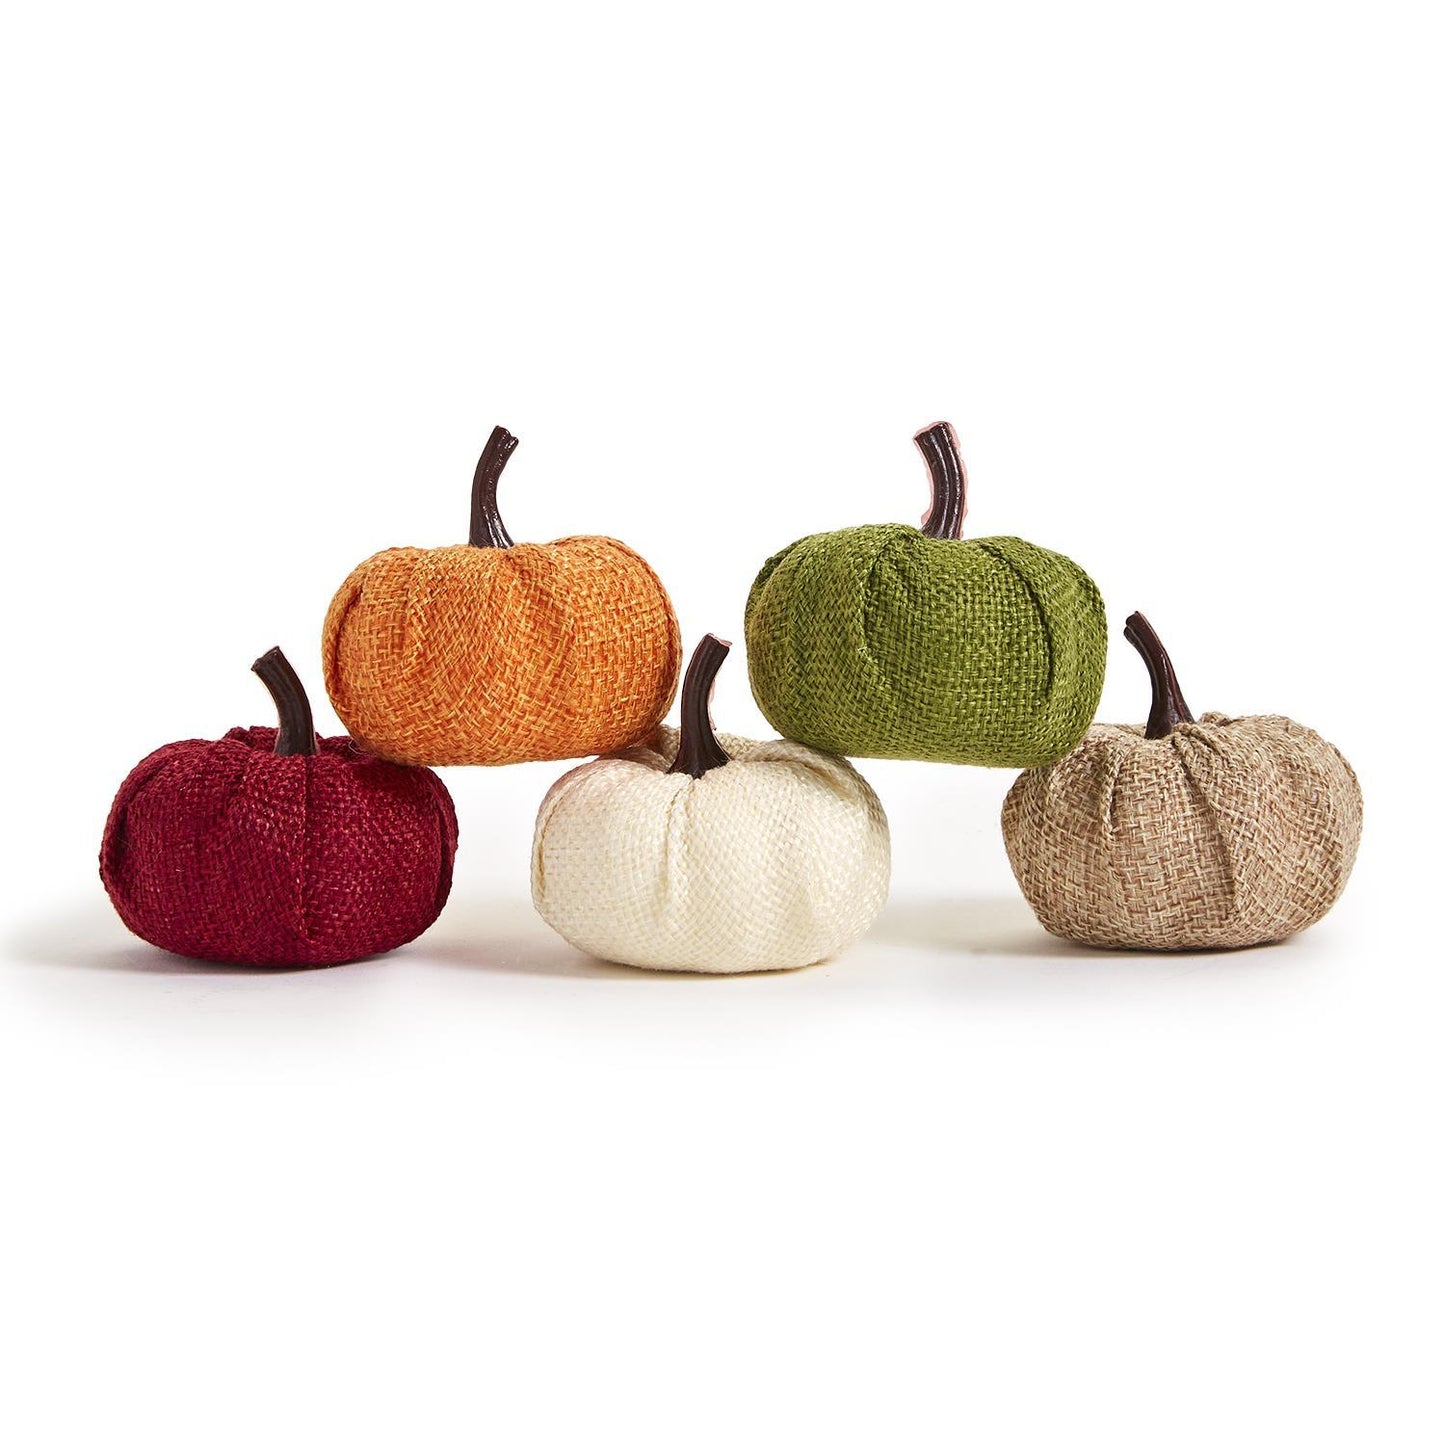 Fabric Wrapped Mini Pumpkins In Assorted Colors